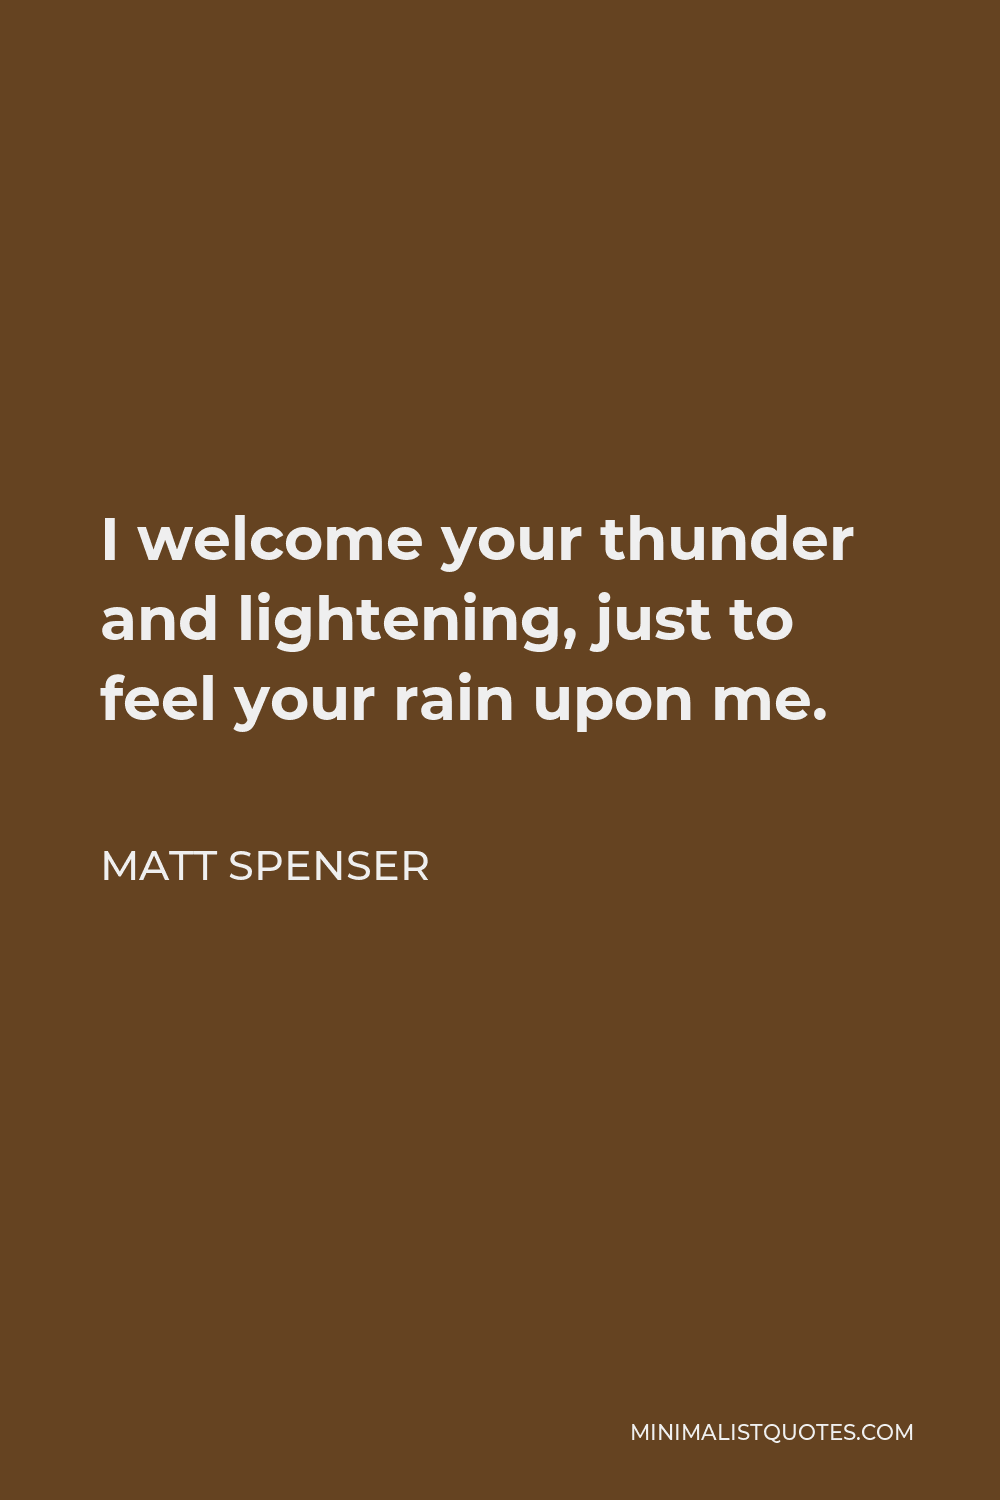 Matt Spenser Quote - I welcome your thunder and lightening, just to feel your rain upon me.